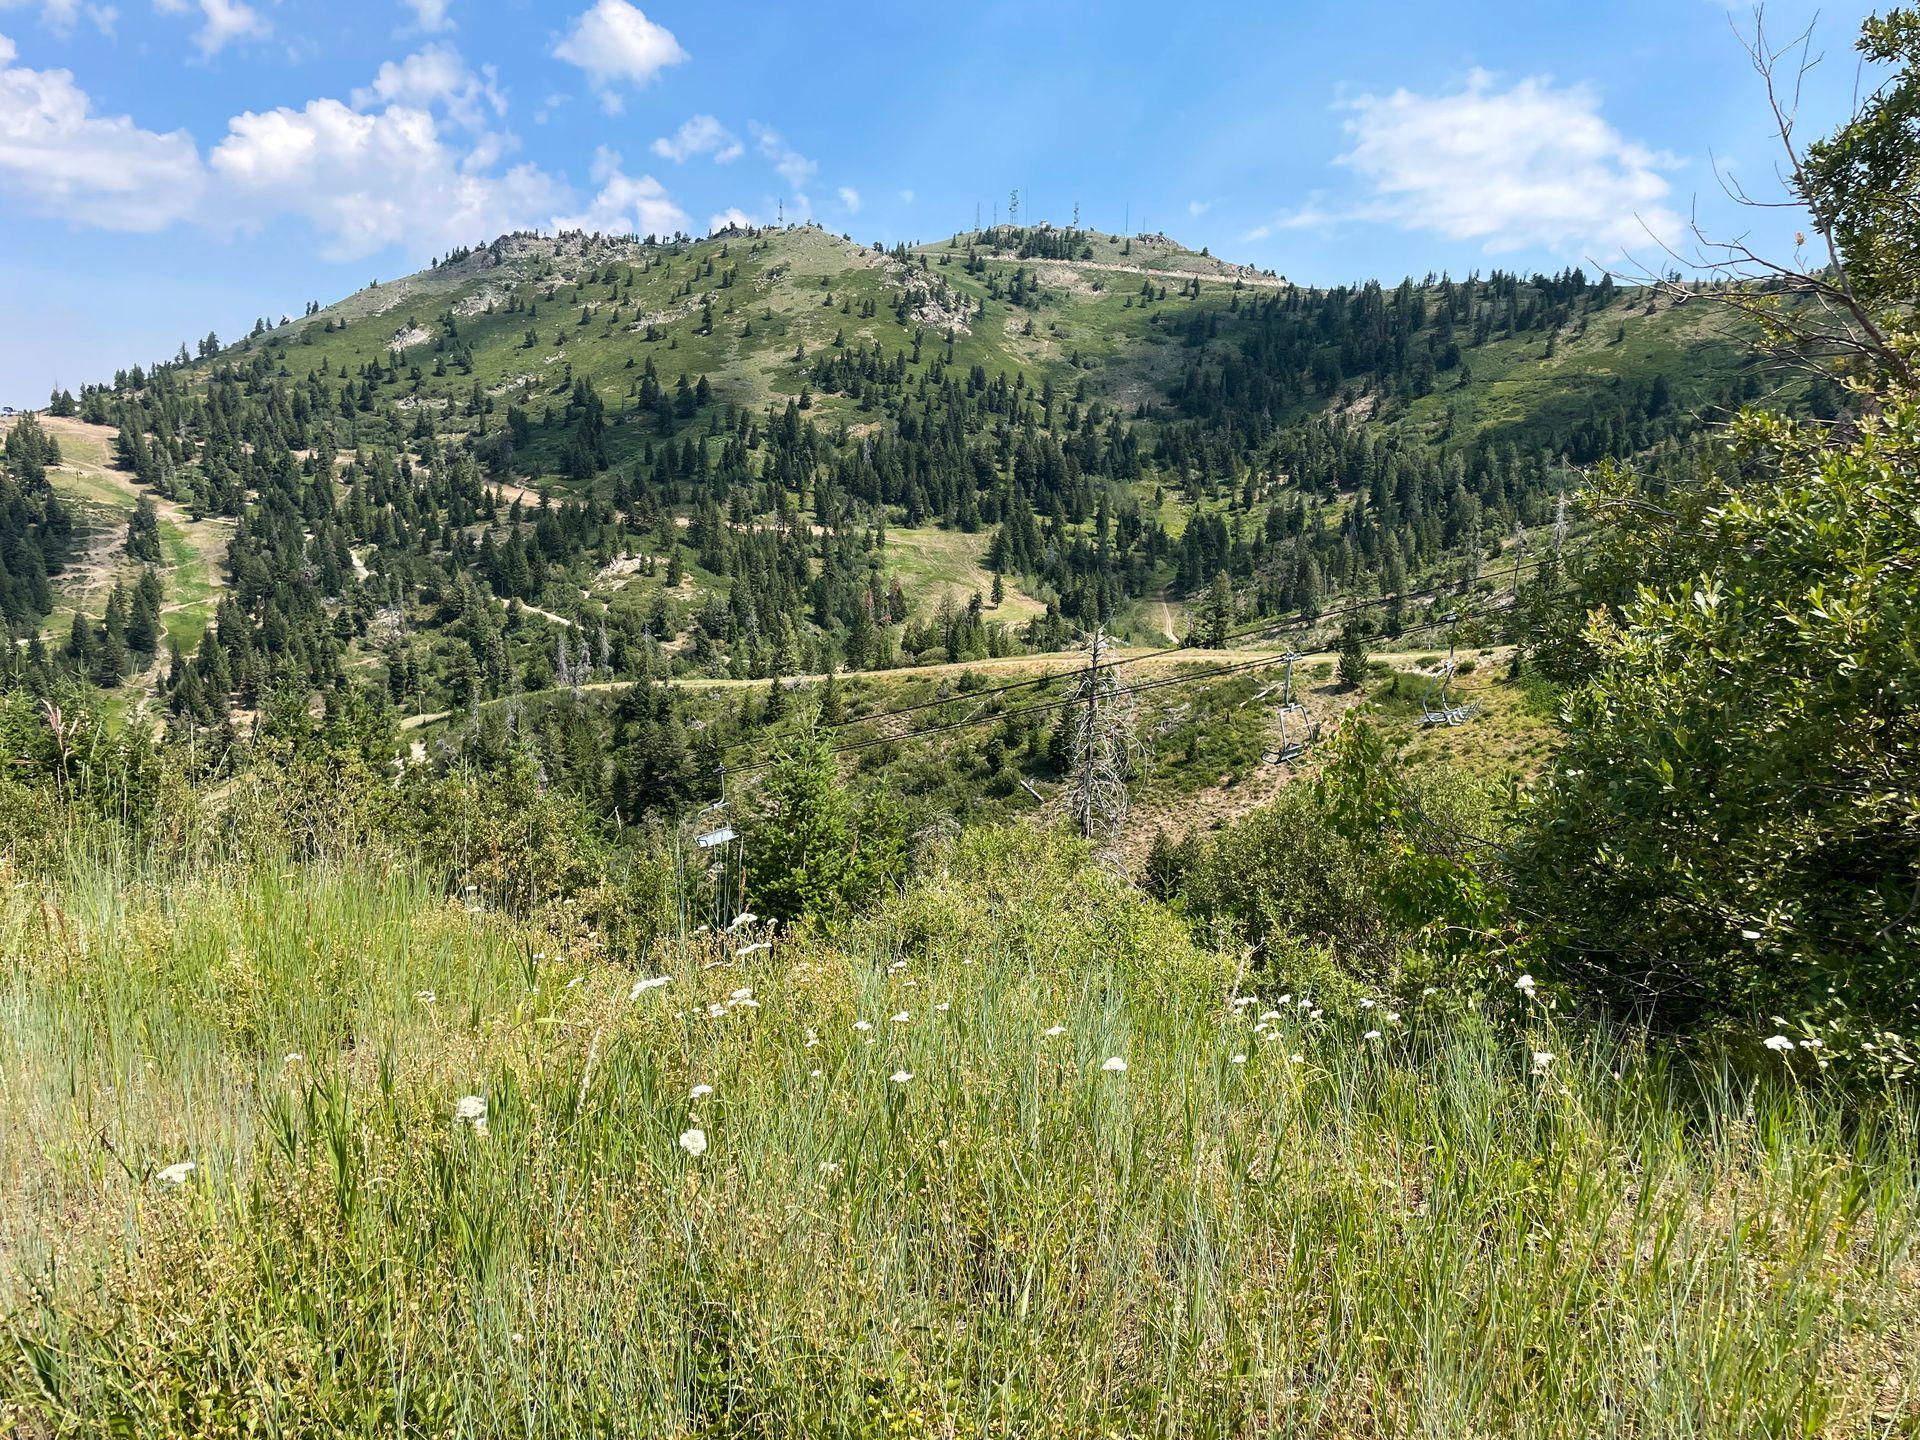 A mountain covered in greenery and trees at Bogus Basin near Boise.